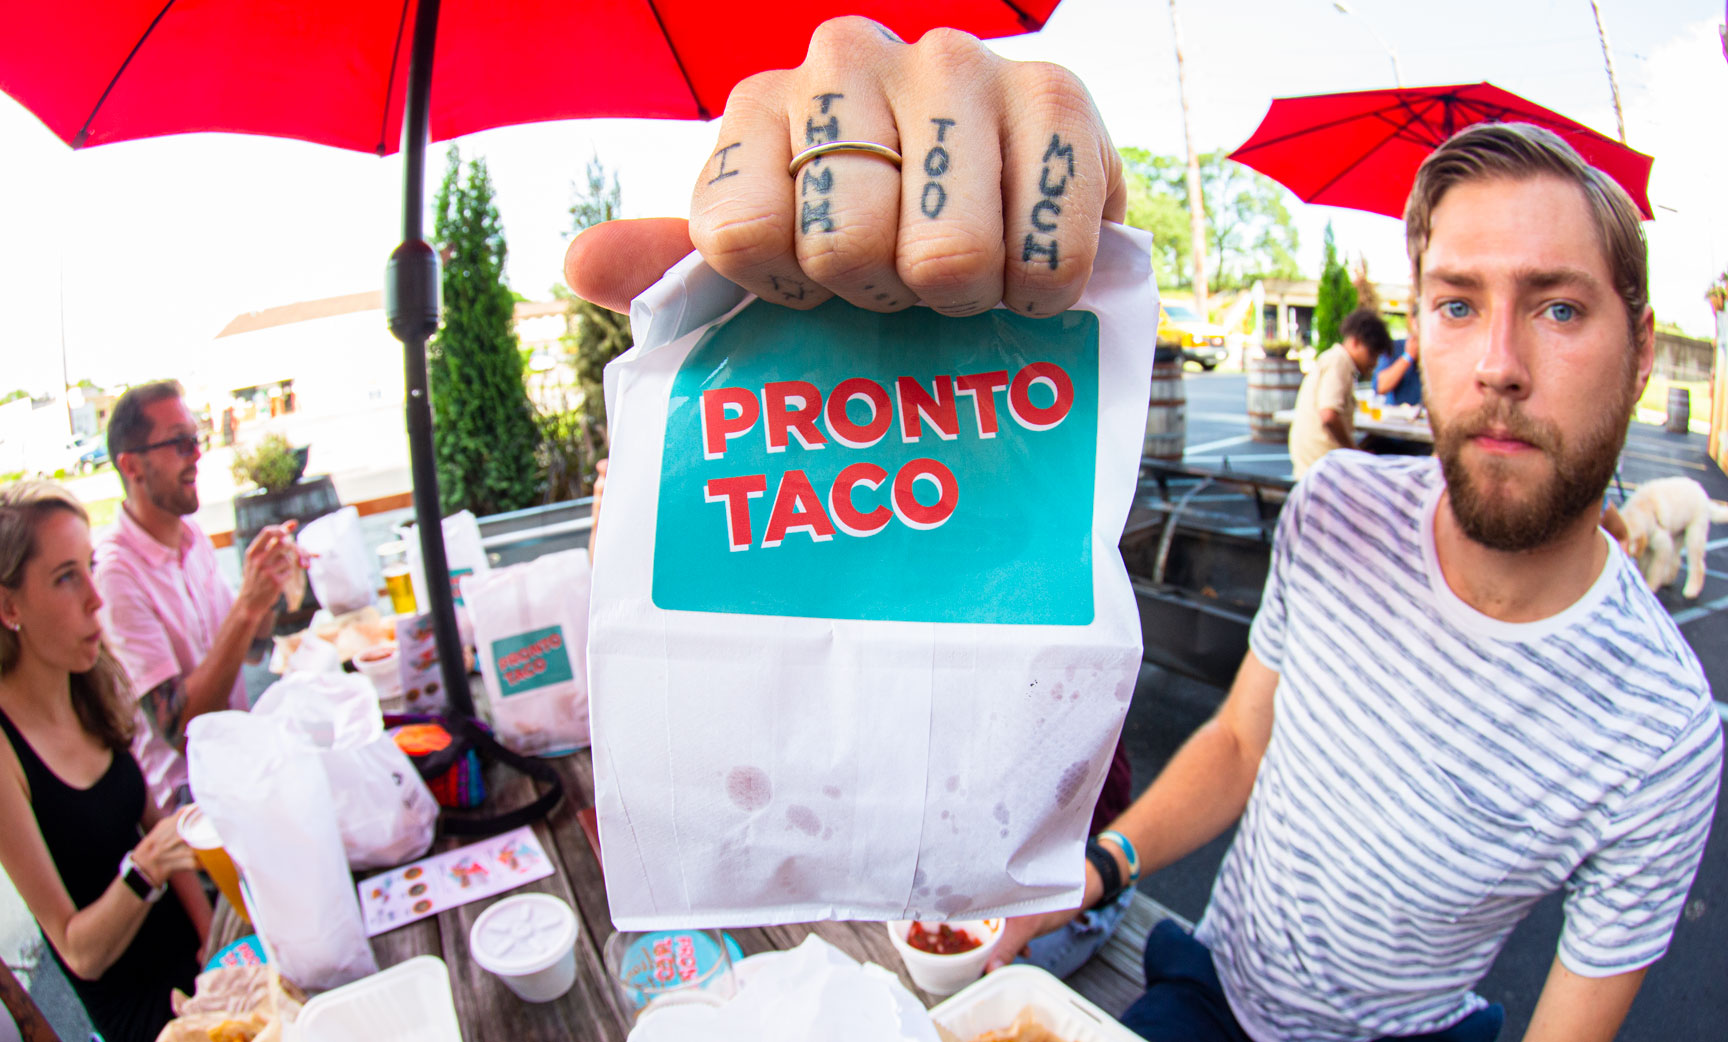 Fish eye lens photo of tattooed hand holding Pronto Taco bag in foreground with people eating outside in background